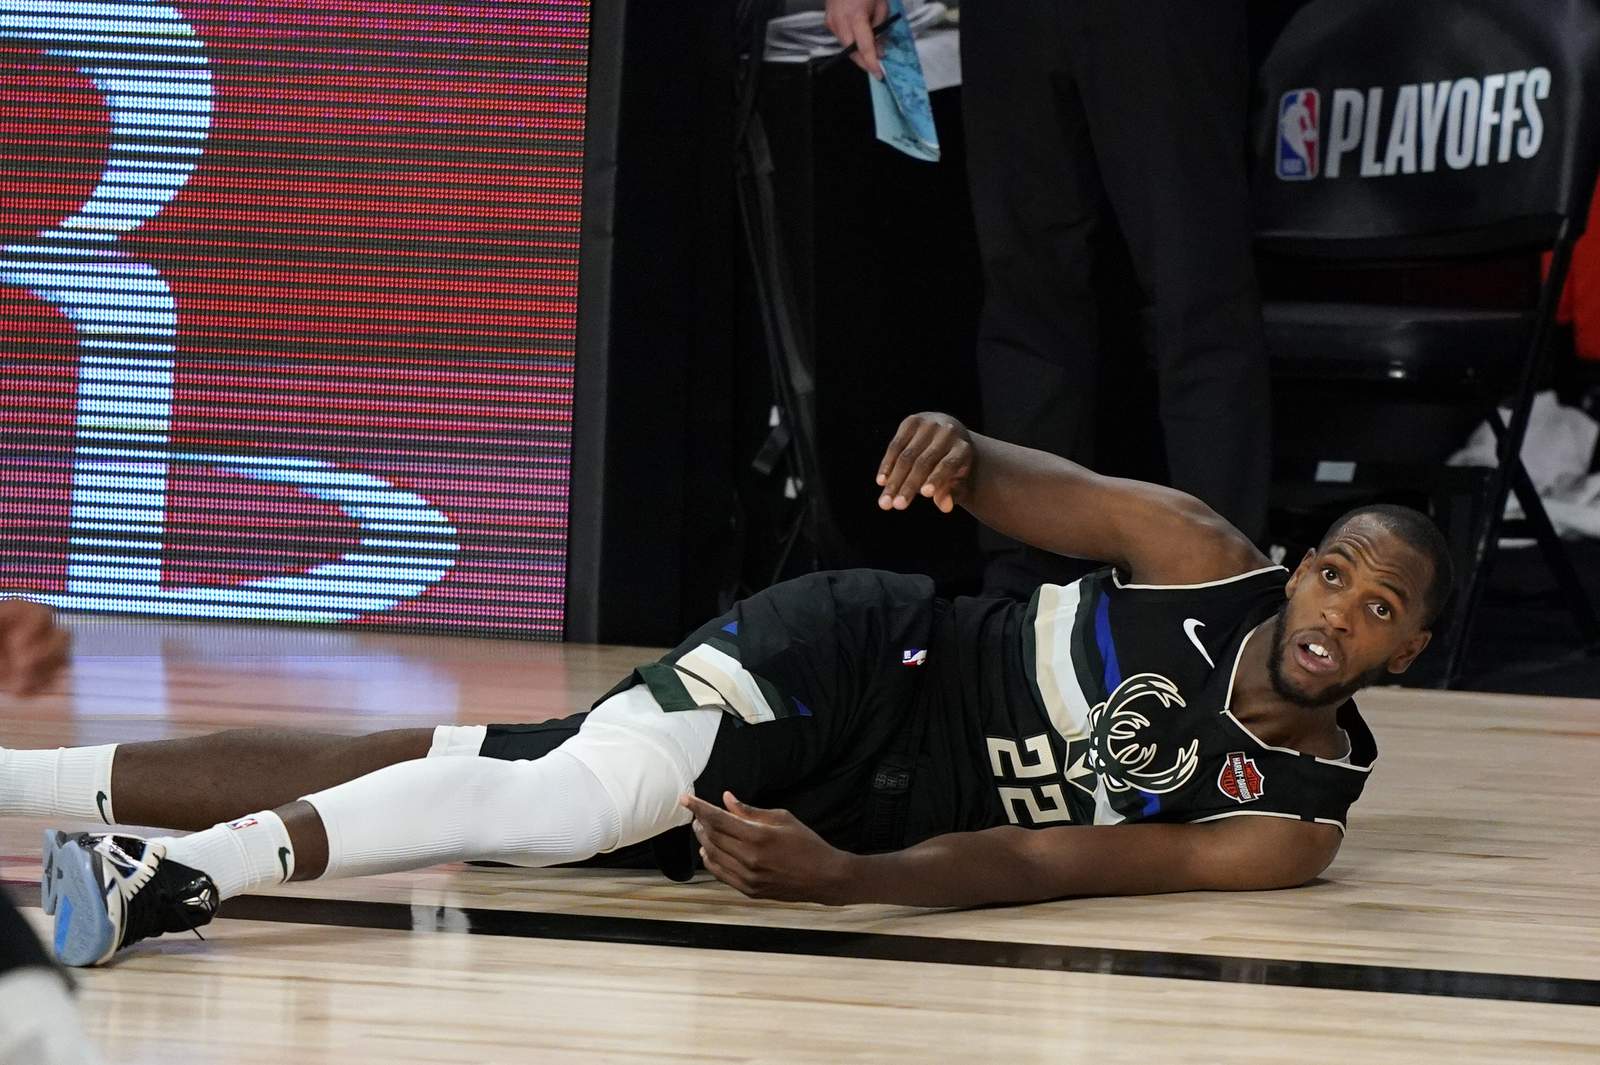 Heat have Bucks in serious trouble going into Game 3